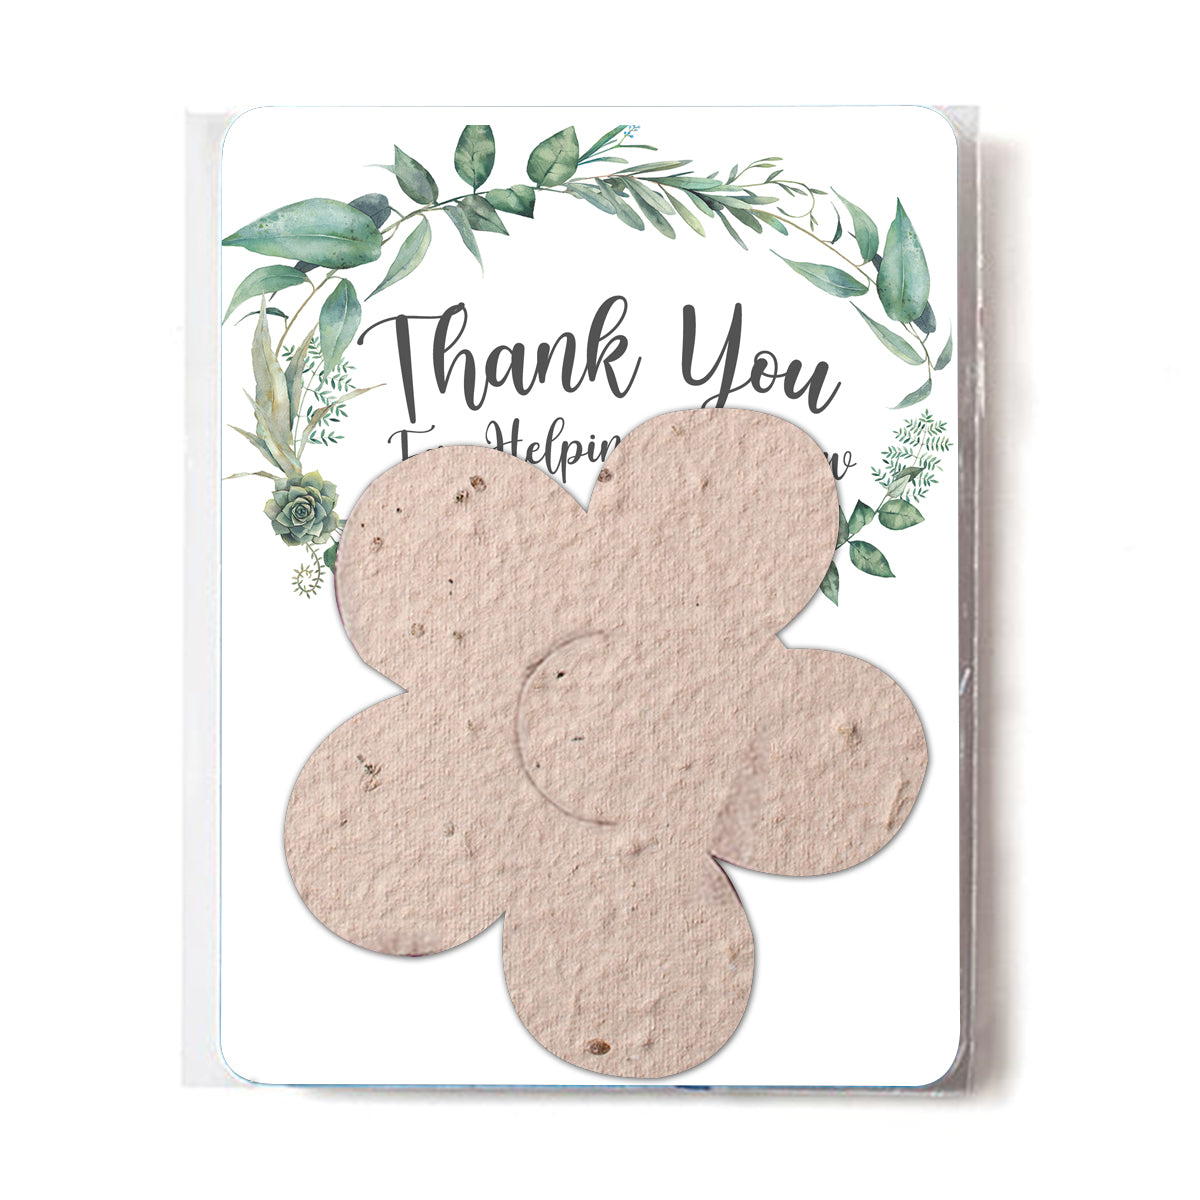 250 Flower Shaped Wildflower Seed Packs with your message